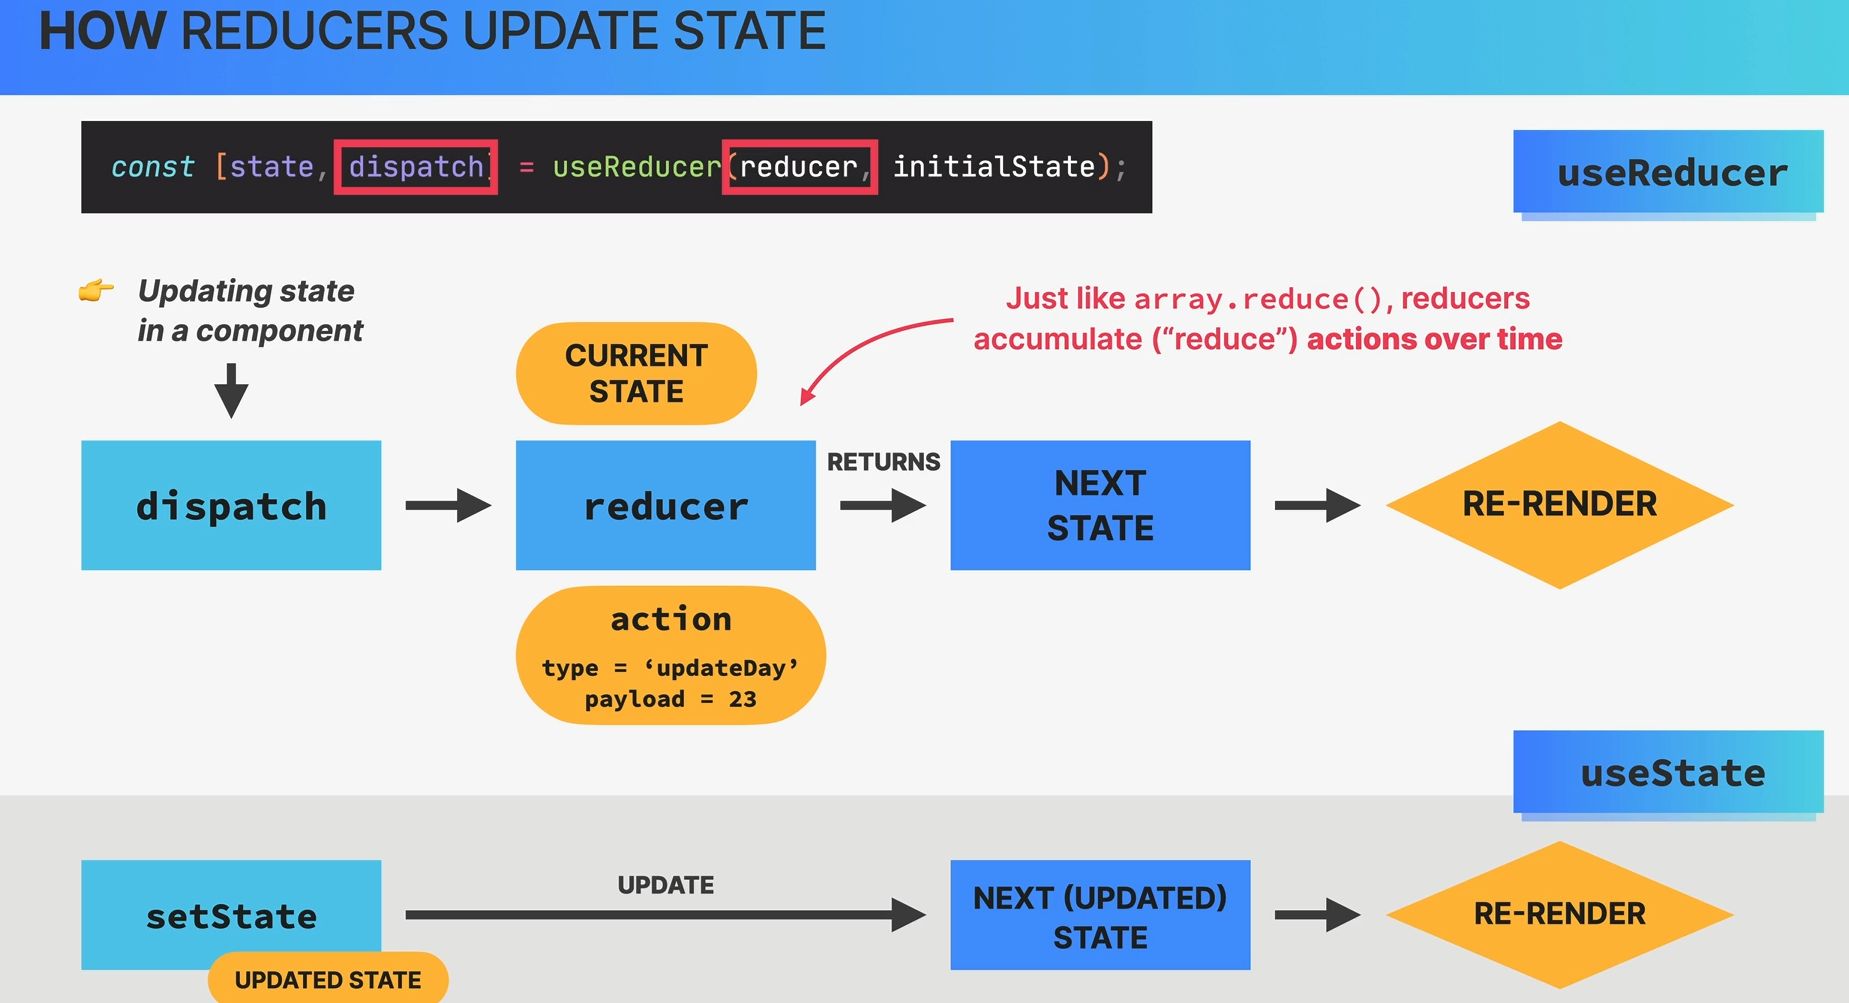 How reducers update state